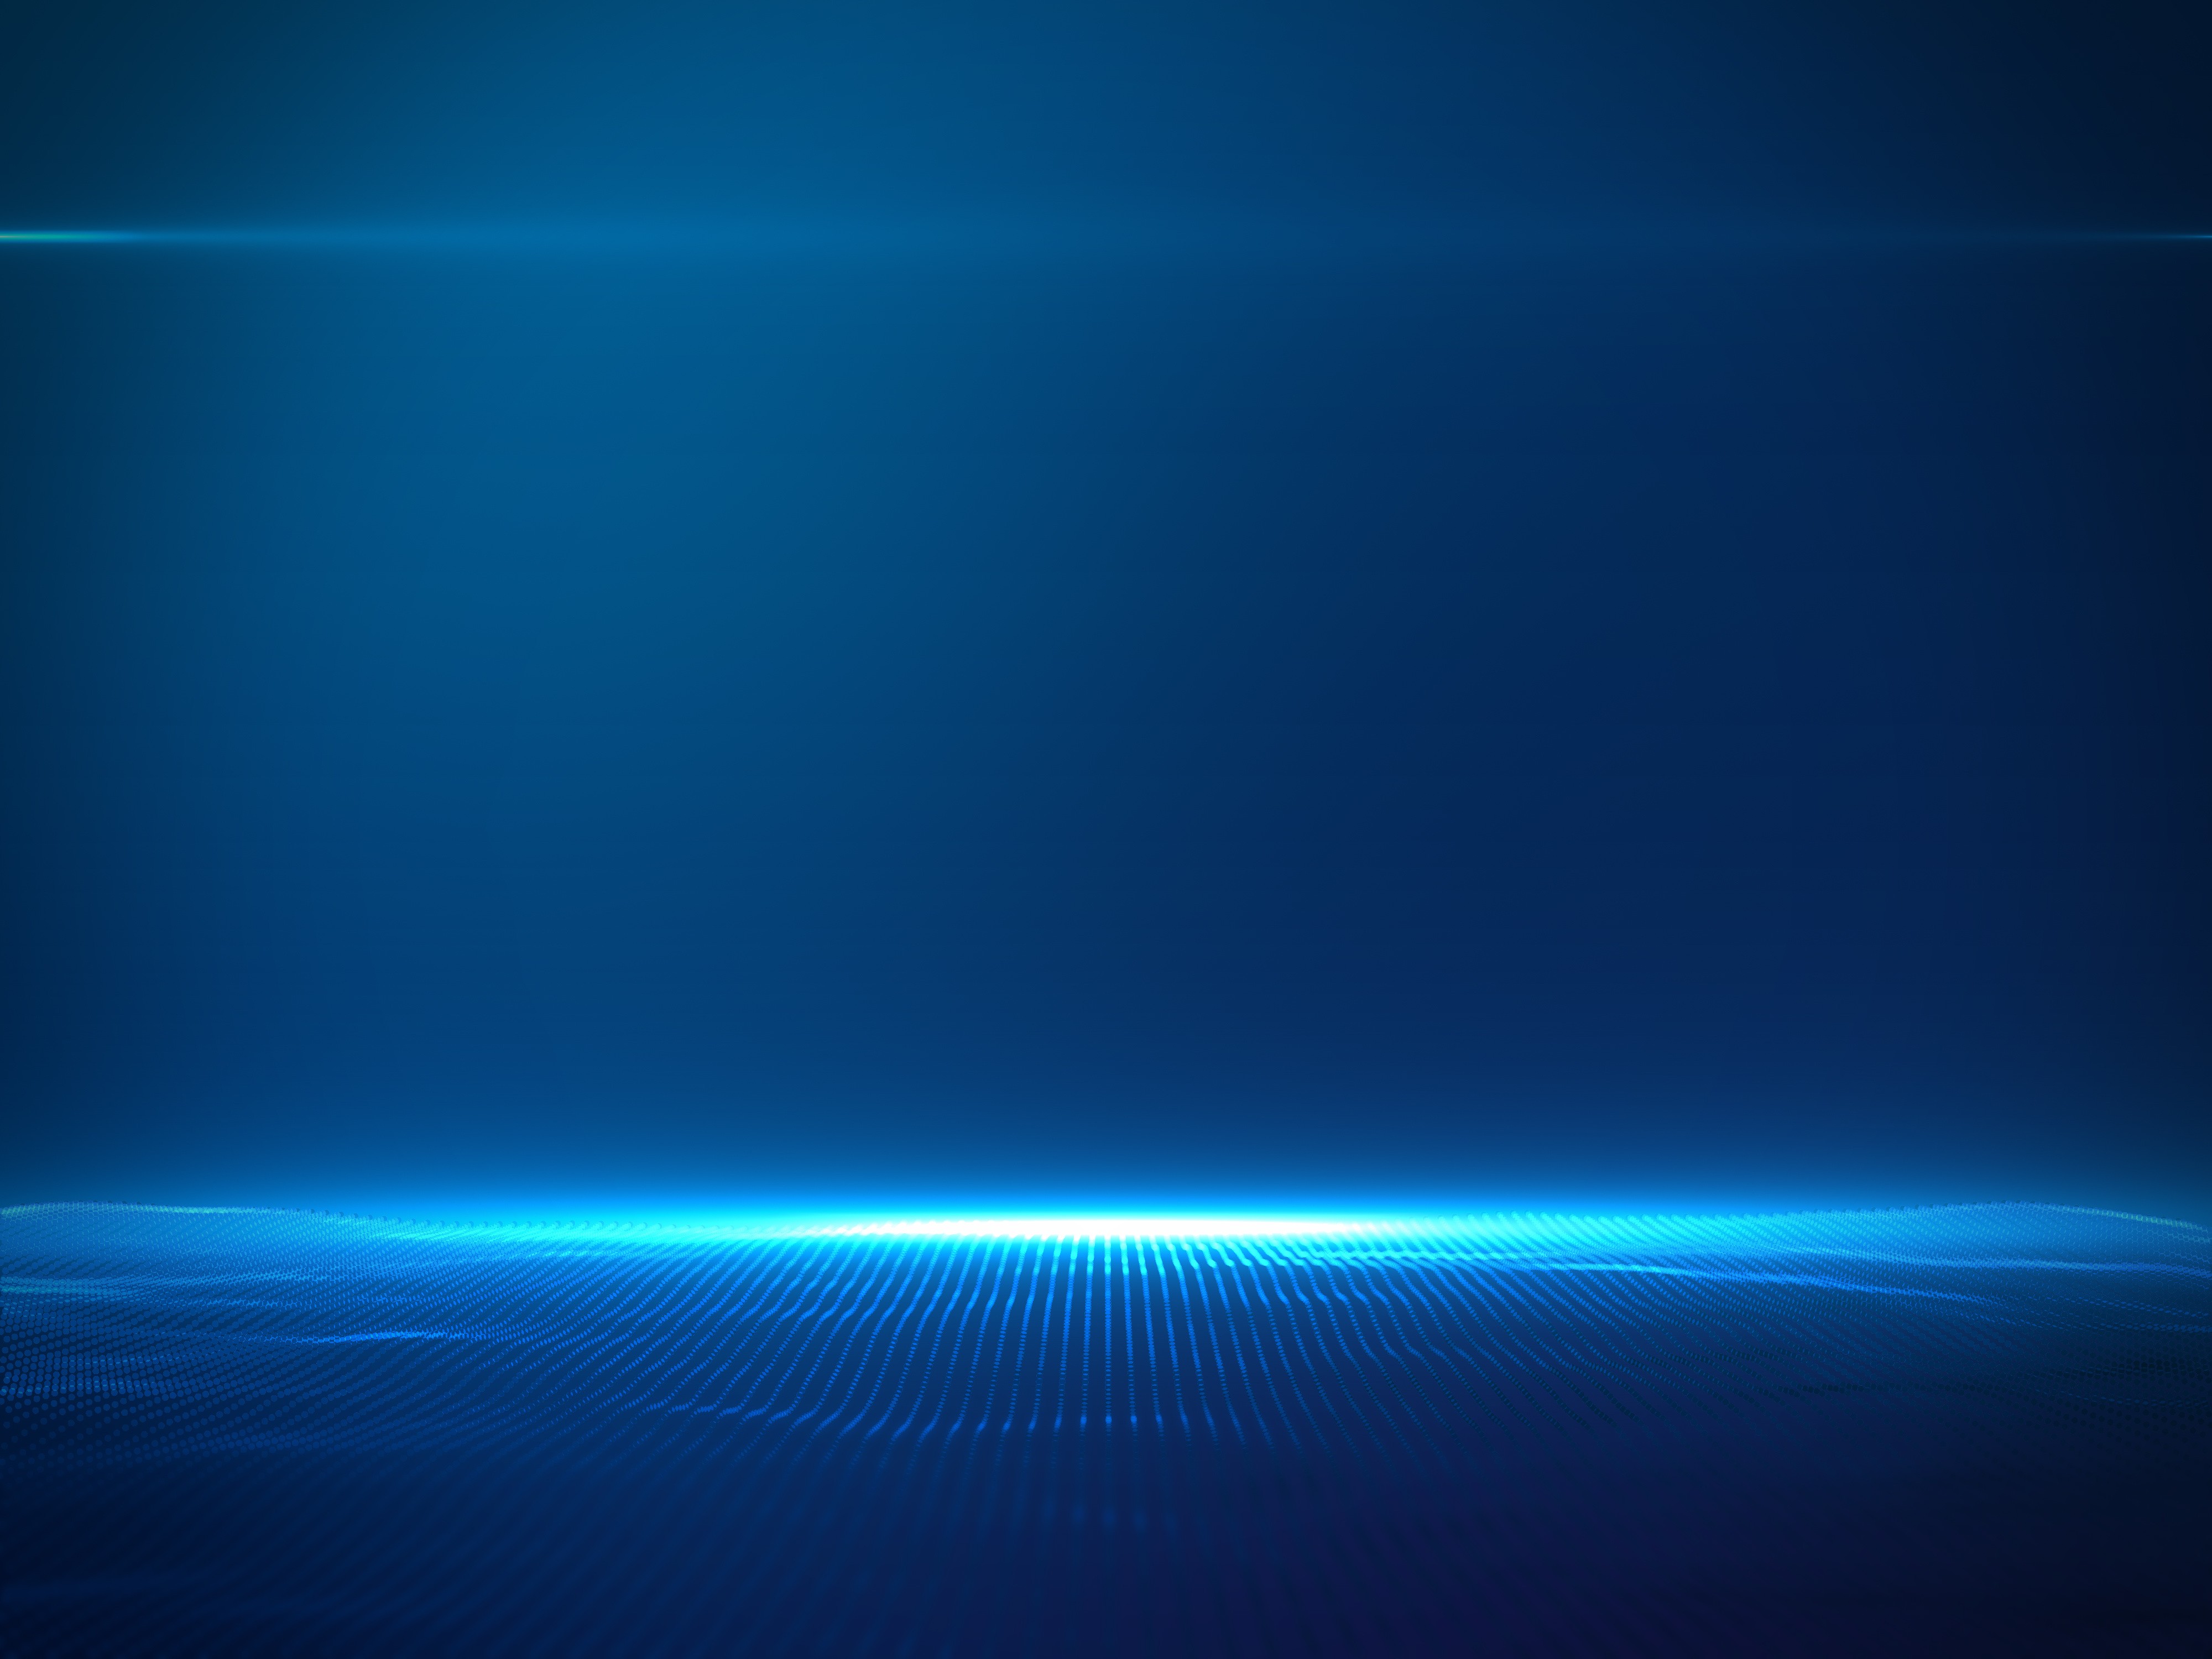 Beautiful Blue Particles with Lens Flare on Blue Gradient Color Background  - Luxury Background Design Element